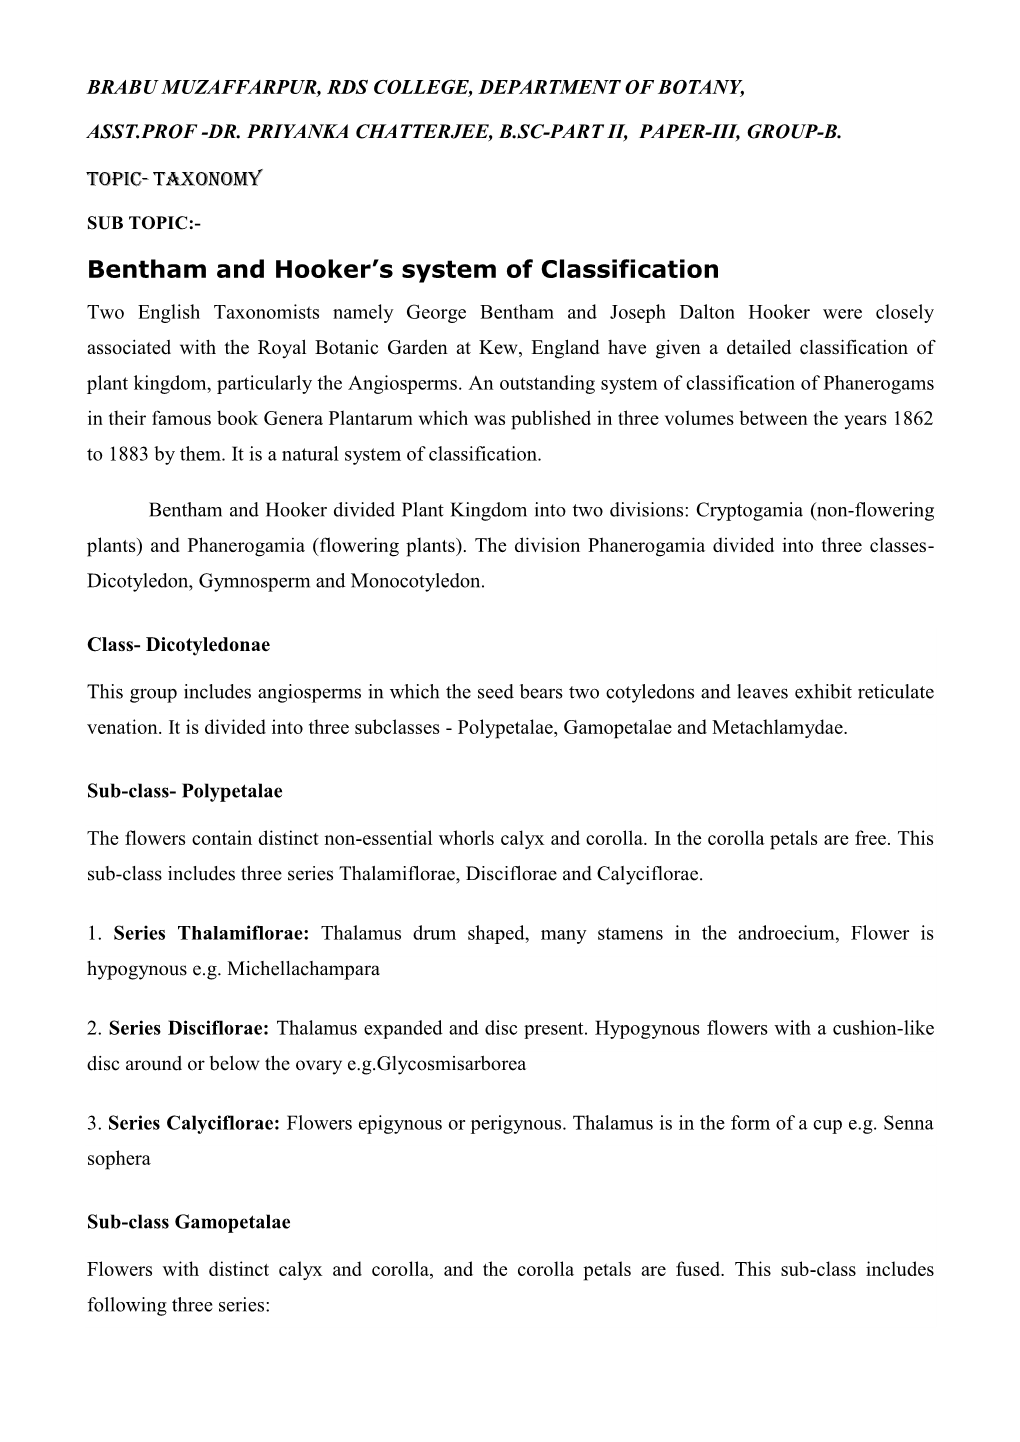 Bentham and Hooker's System of Classification